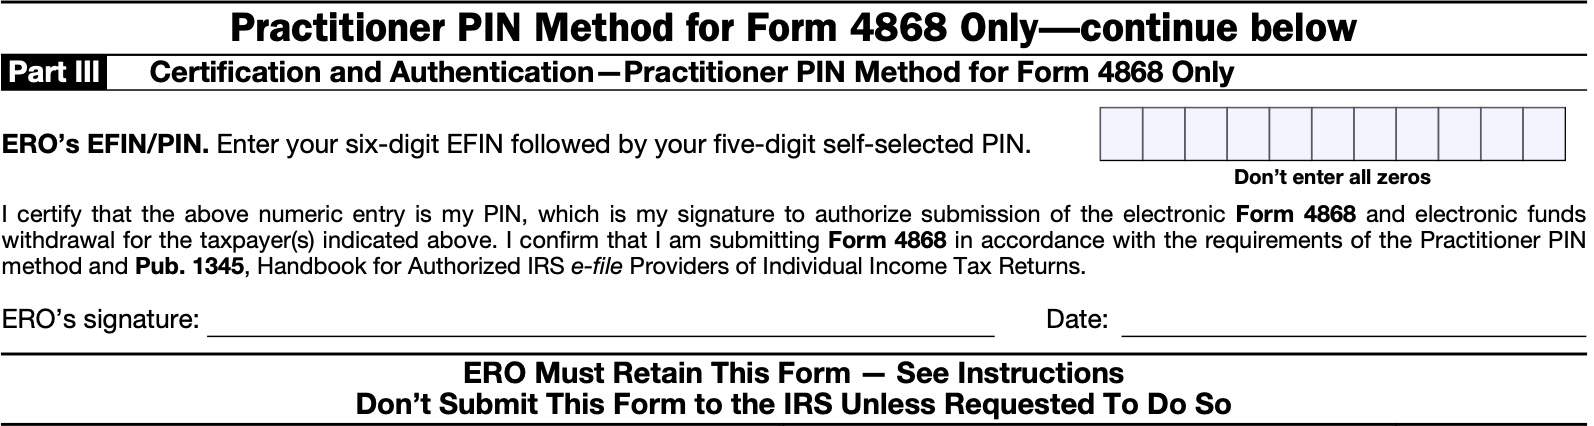 part iii: certification and authentication for Form 4868 only